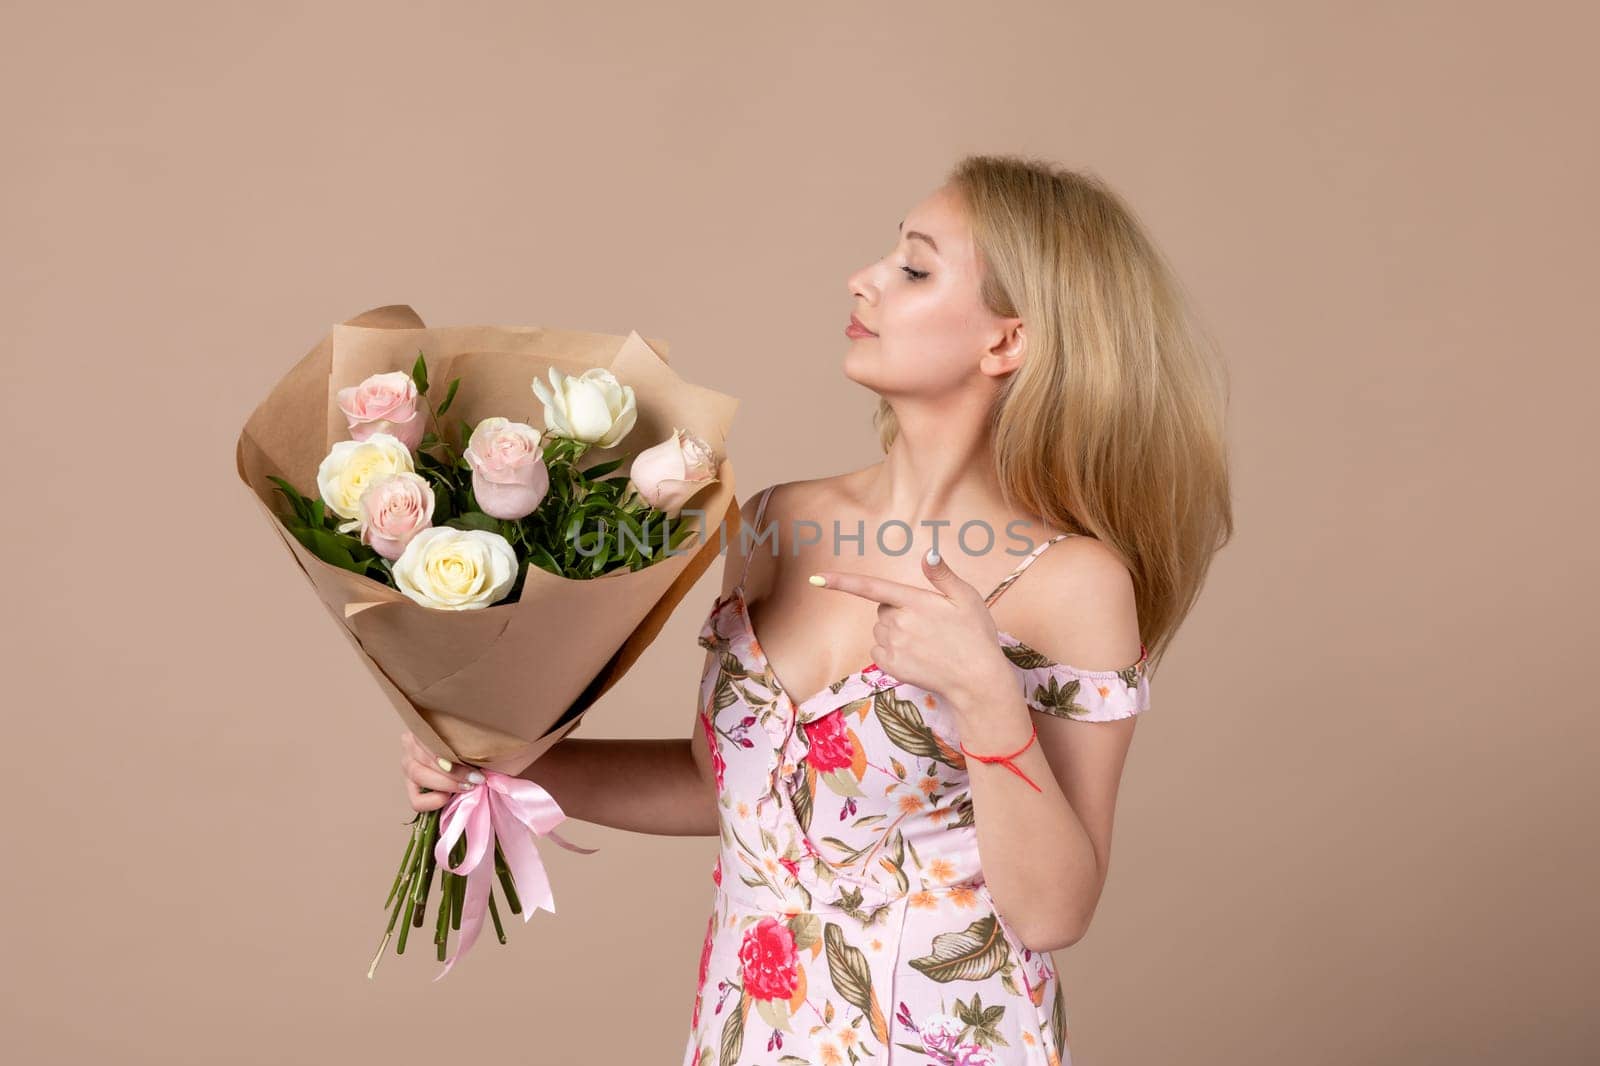 front view young female posing with bouquet of beautiful roses on brown background feminine sensual horizontal march marriage equality woman by Kamran